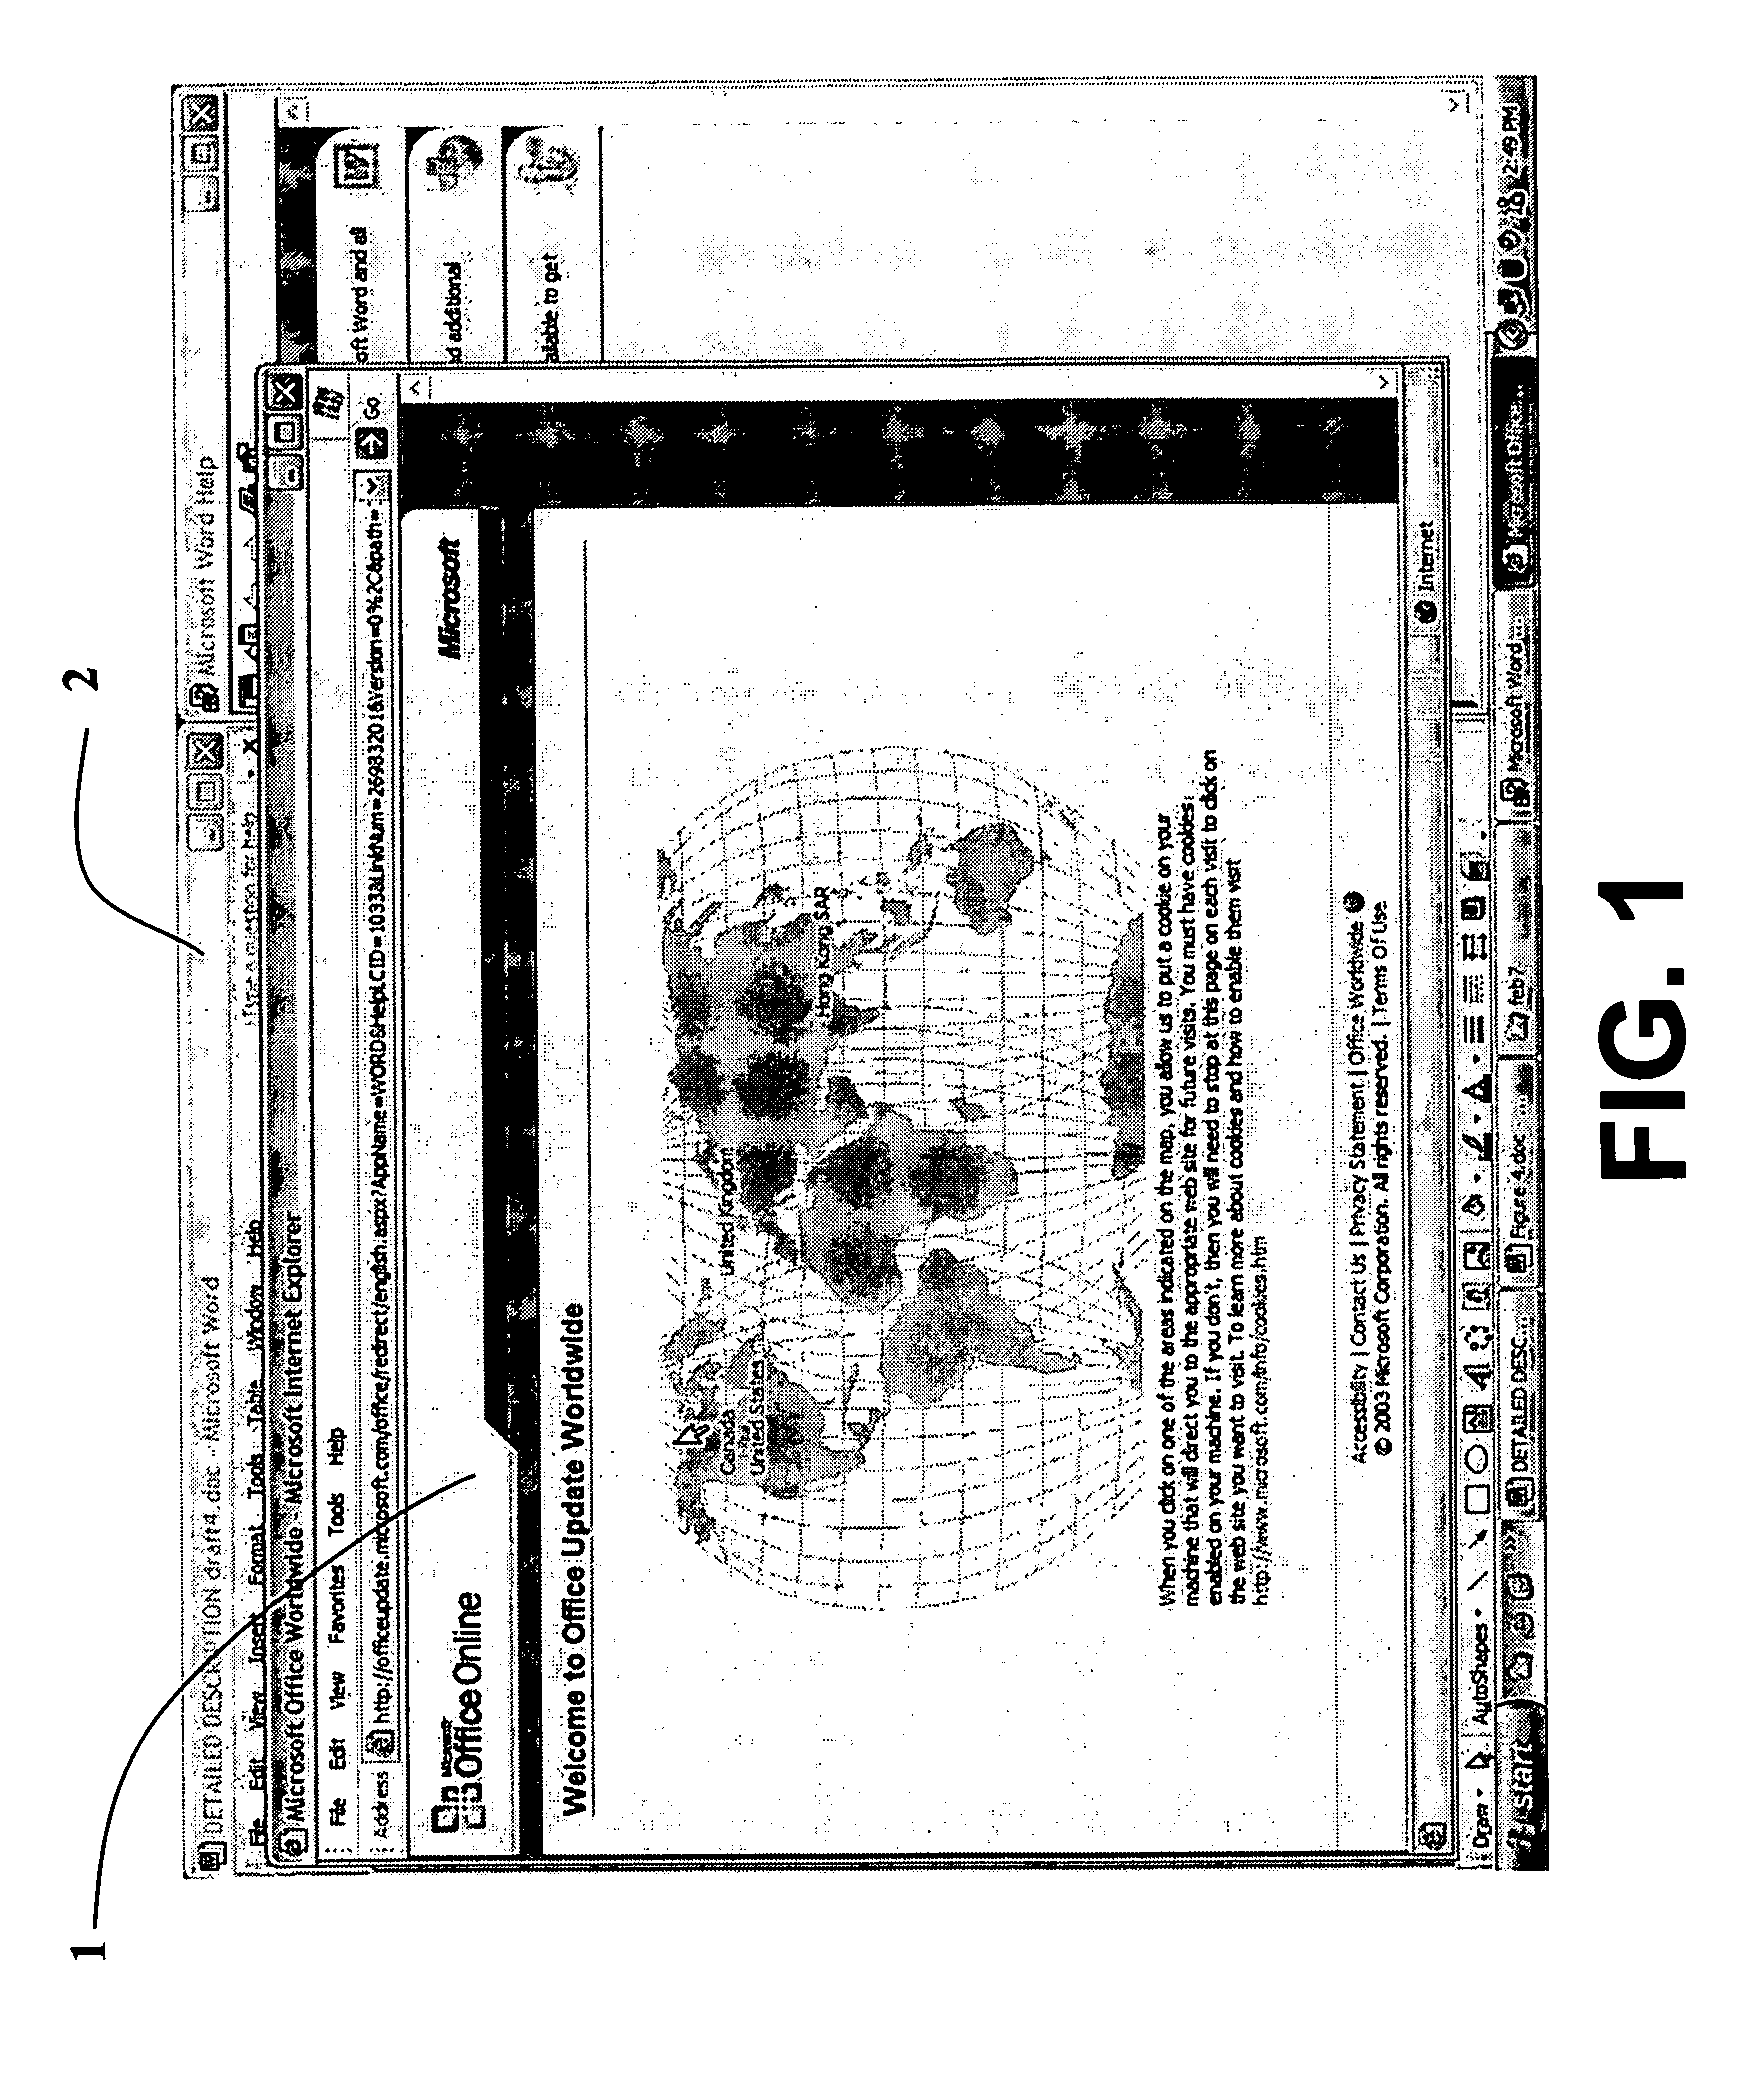 Voice activated system and methods to enable a computer user working in a first graphical application window to display and control on-screen help, internet, and other information content in a second graphical application window